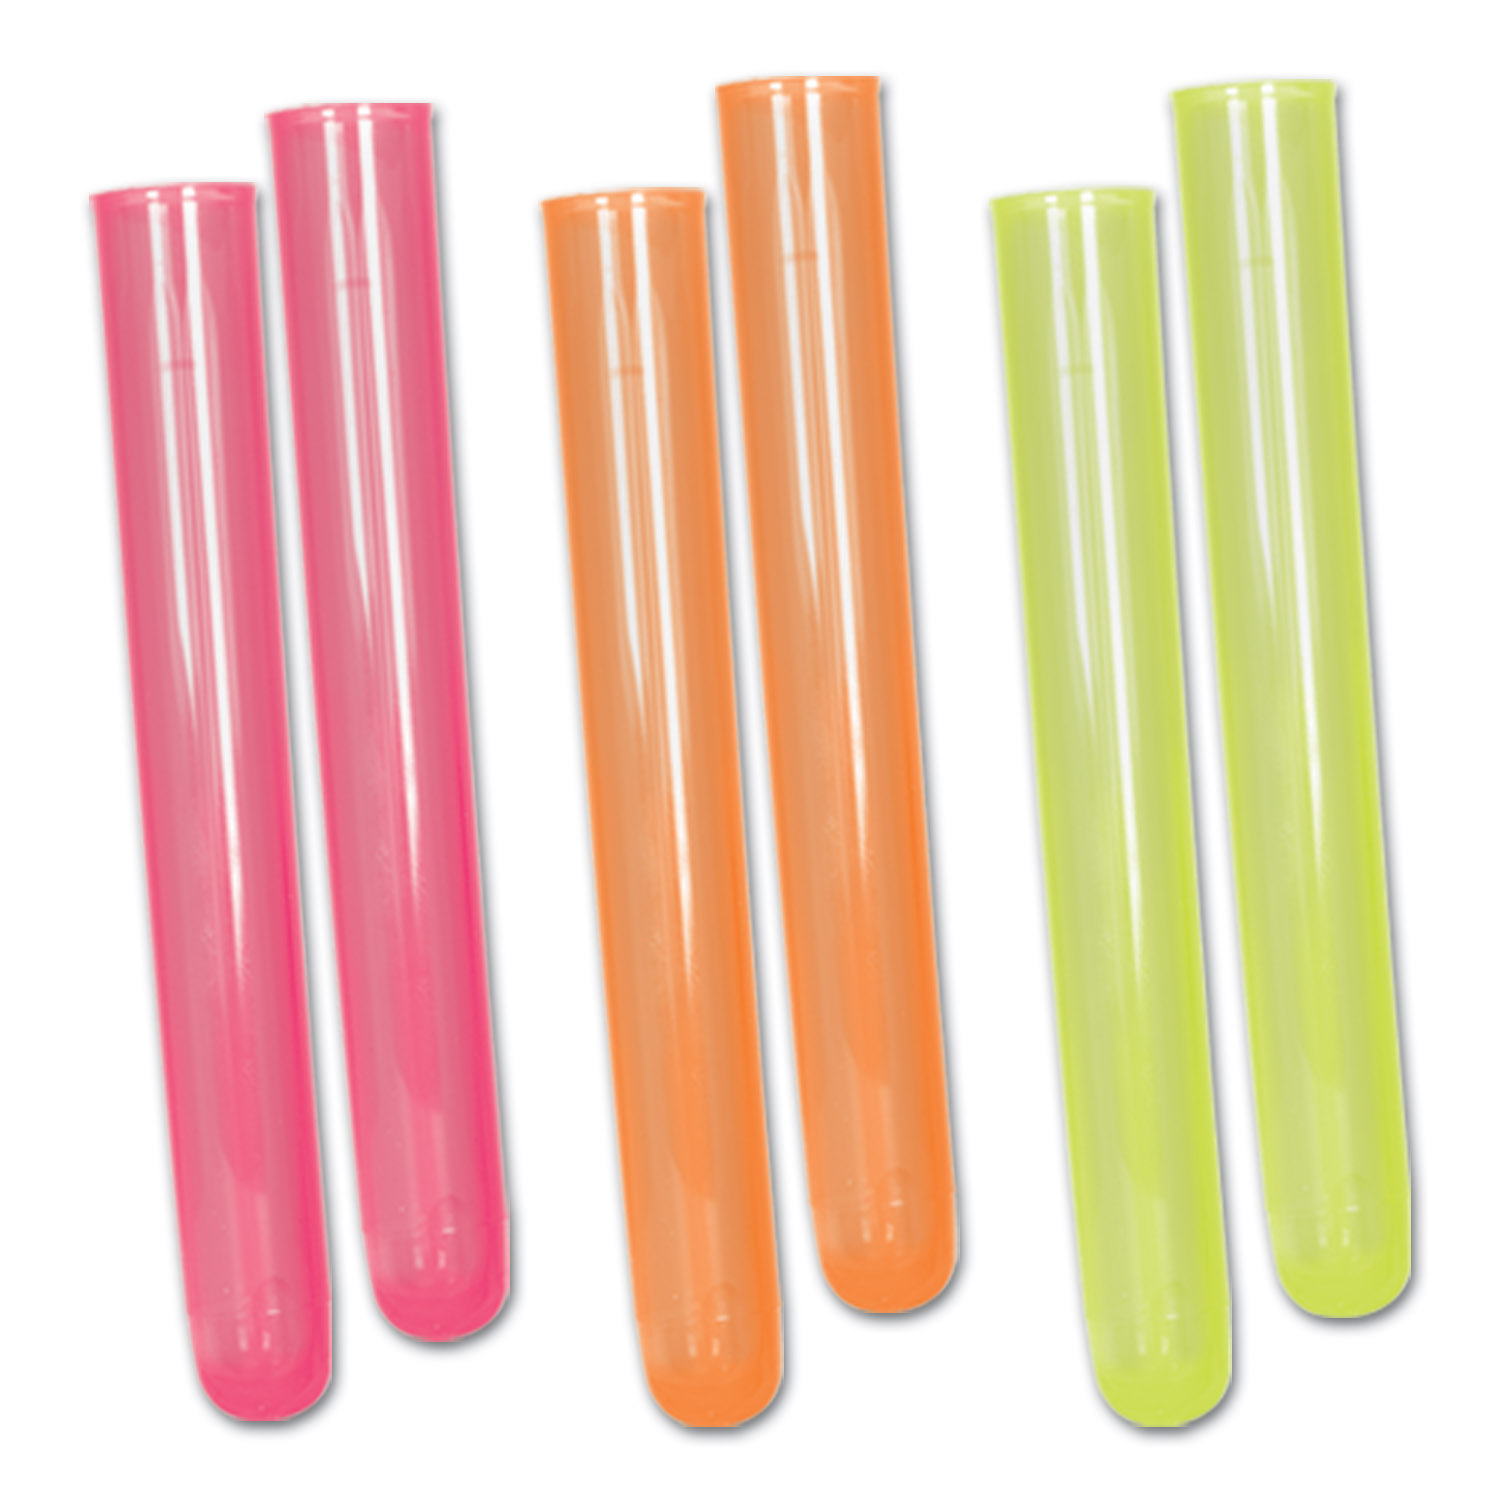 12 Pack of Neon Test Tube Shots asstd colors.